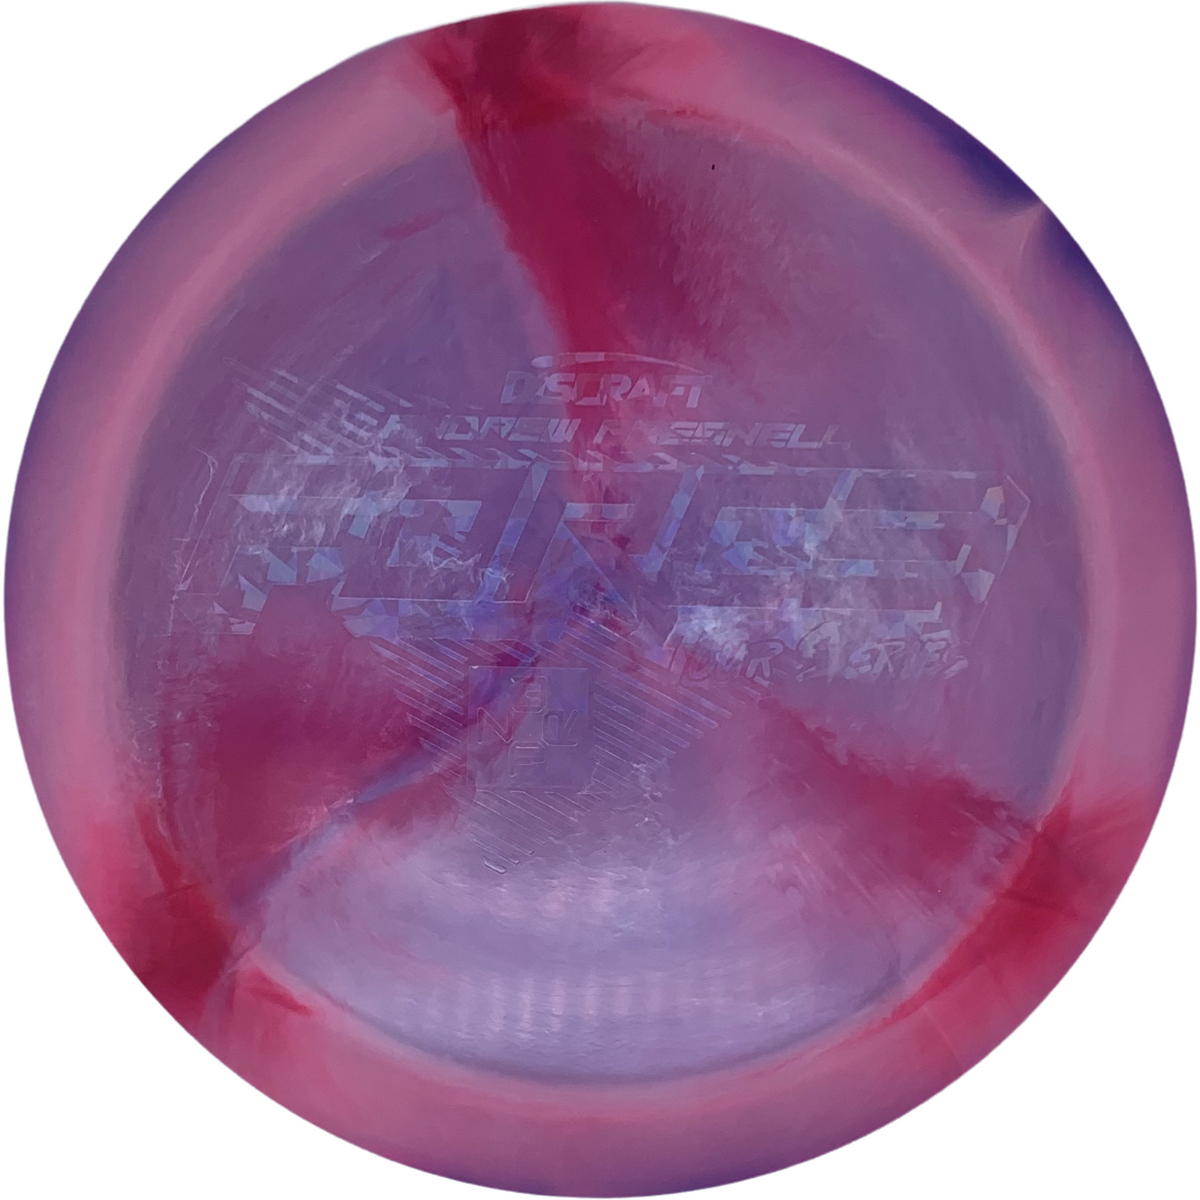 Discraft Andrew Presnell ESP Force - 2022 Tour Series